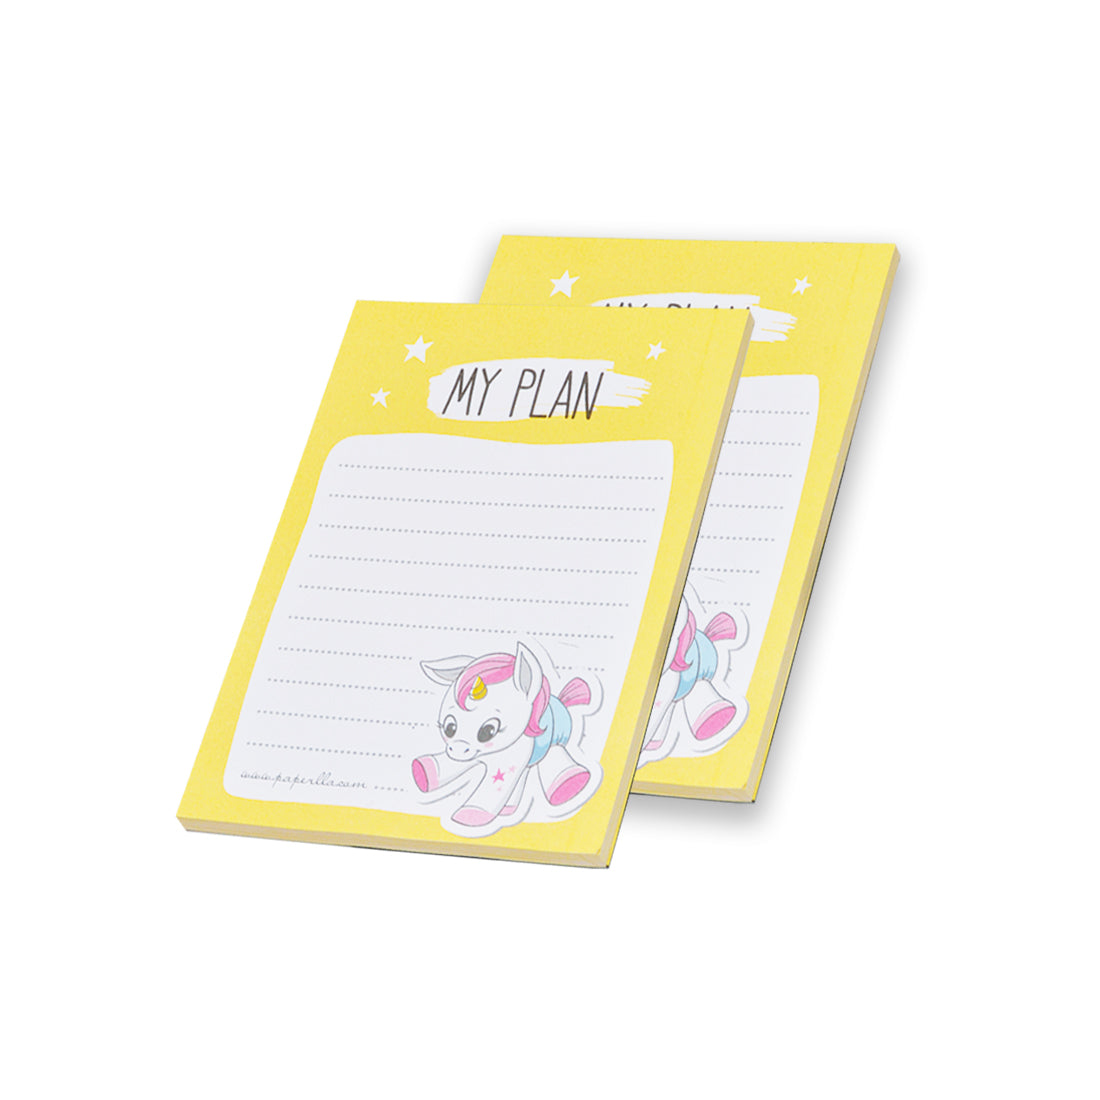 TO DO LIST DIARY, CUTE STATIONERY ITEMS MONTHLY PLANNER JOURNAL WRITING PADS GIFTS FOR TEACHERS BY STUDENTS, SET OF 4